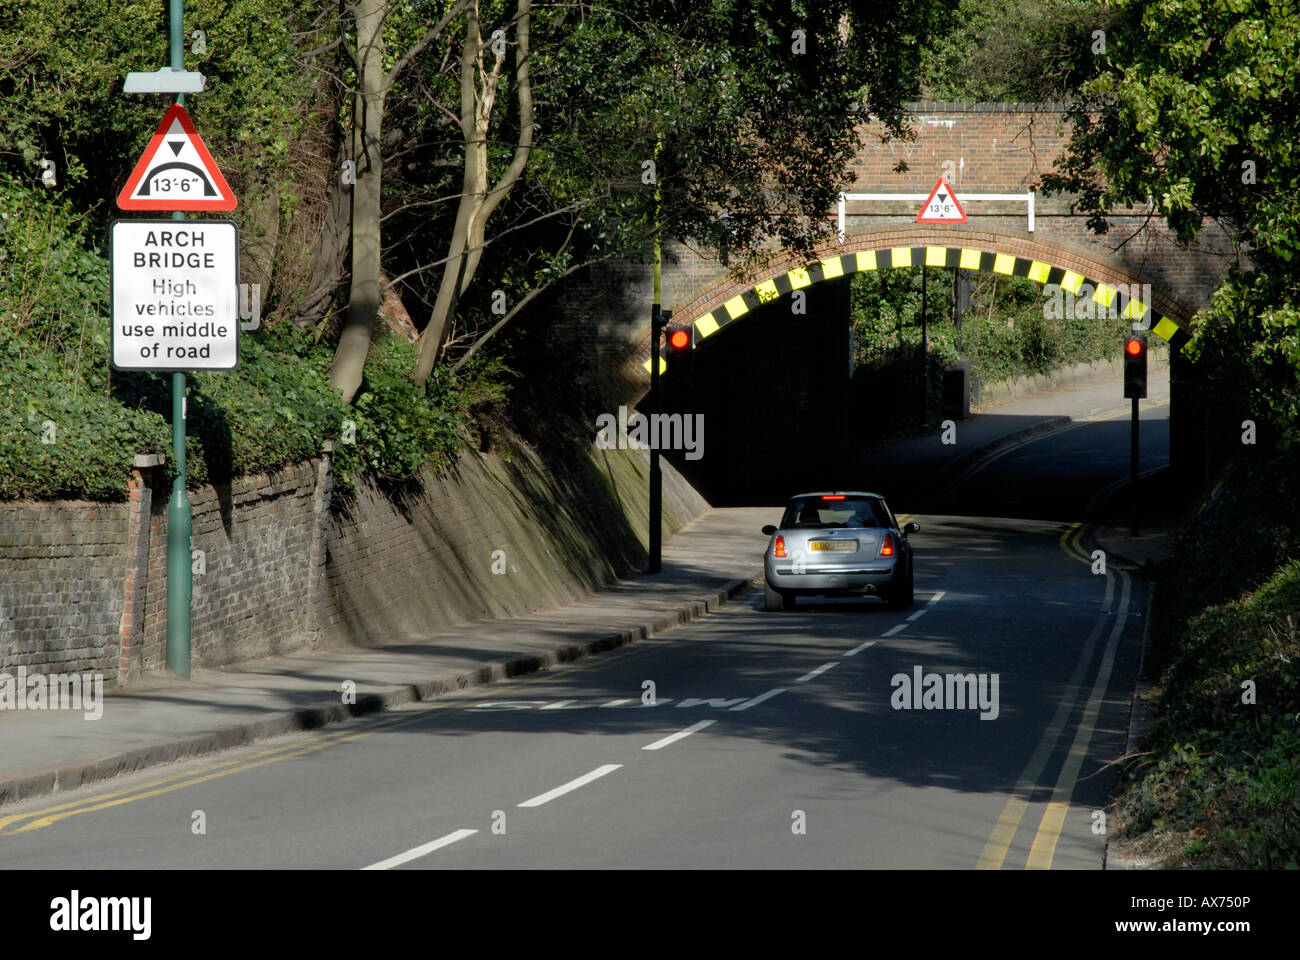 Low arch bridge with warning sign and high visibility markings and waiting car at red light, Cheam, south London, Surrey Stock Photo